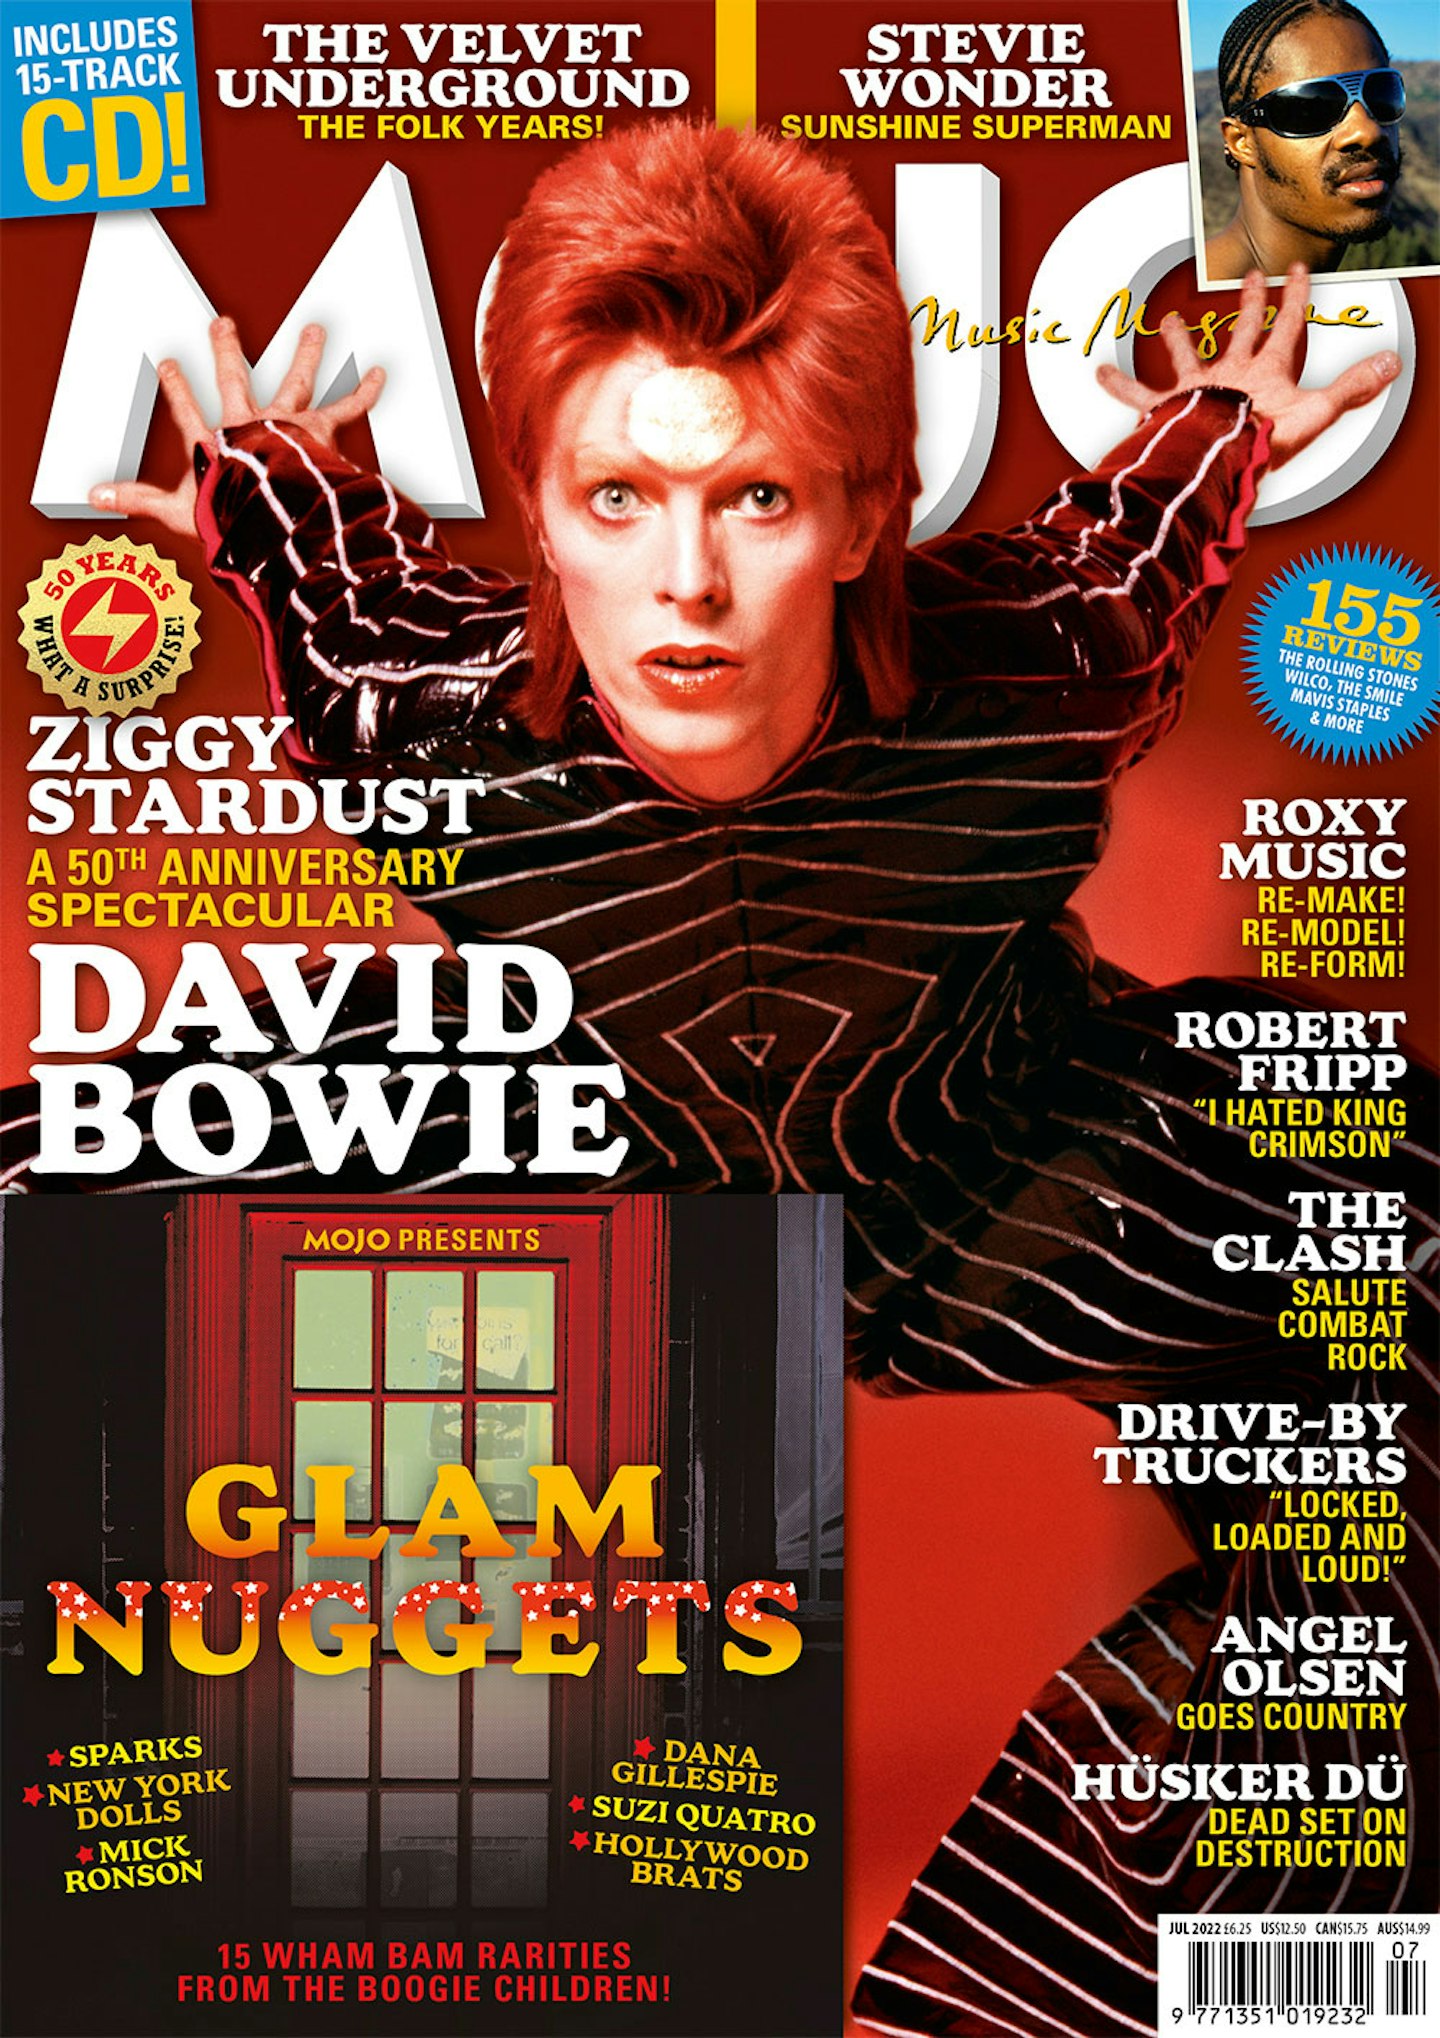 The cover of MOJO 344, featuring David Bowie as Ziggy Stardust